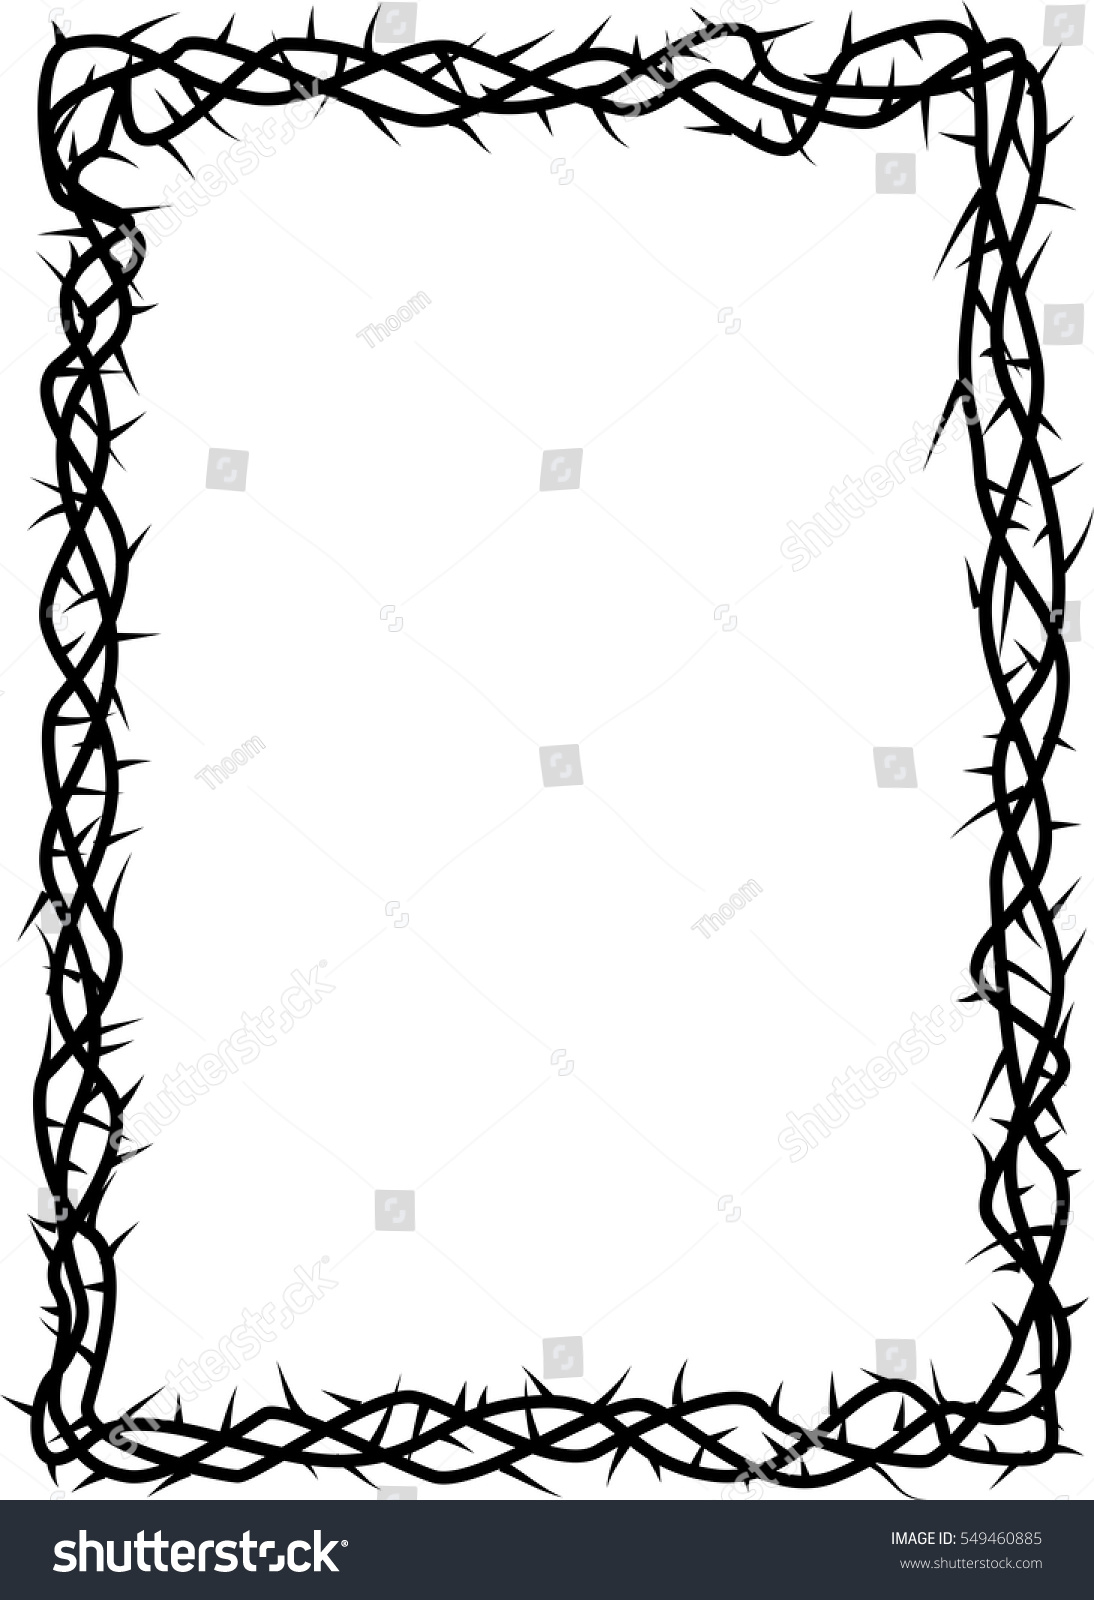 Frame Of Thorns Crown Of Thorns Background Royalty Free Stock